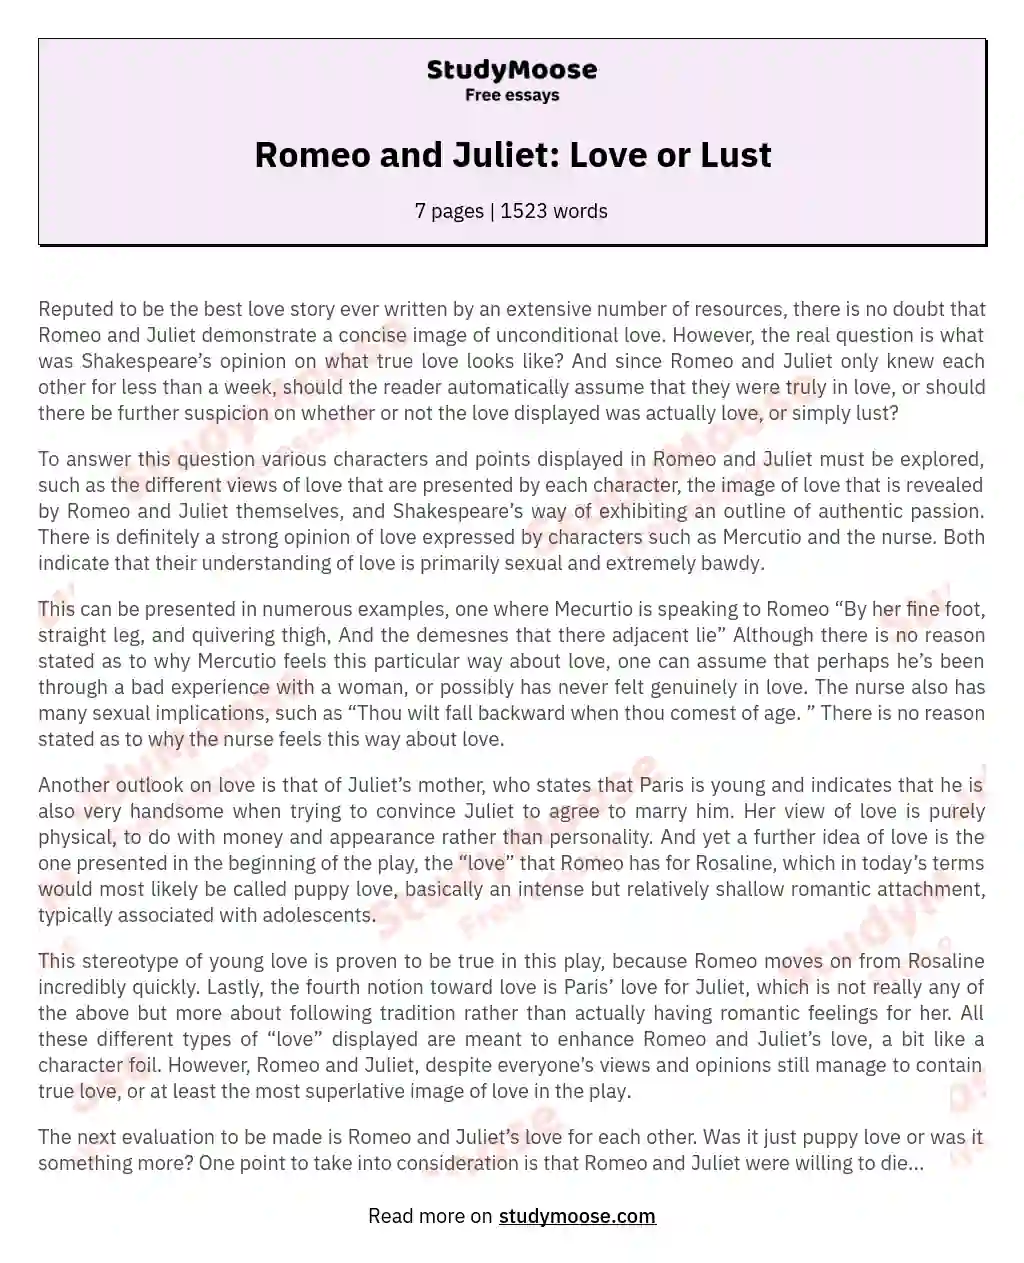 The Complexity of Love in Romeo and Juliet essay